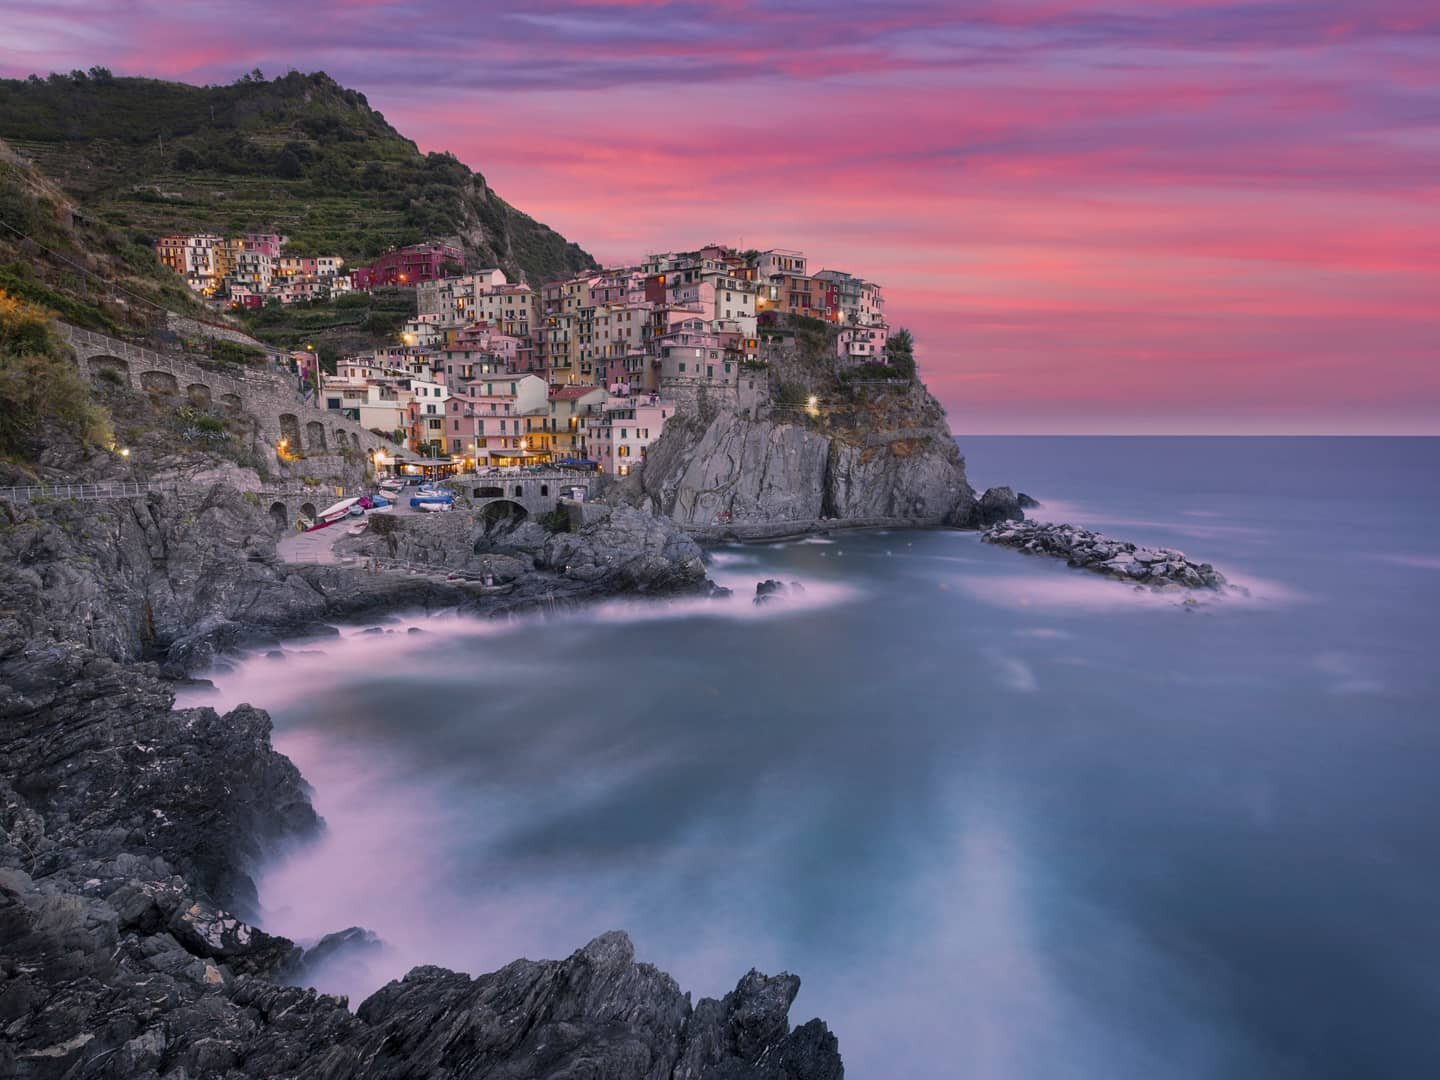 Posting this one as an entry into the #creativeeditingchallenge hosted by @skylum_global! I've used my original shot taken in 2013 from #manarola as the base edit but have added in one of @elialocardi's stunning skies using  @luminar_ai's sky replace